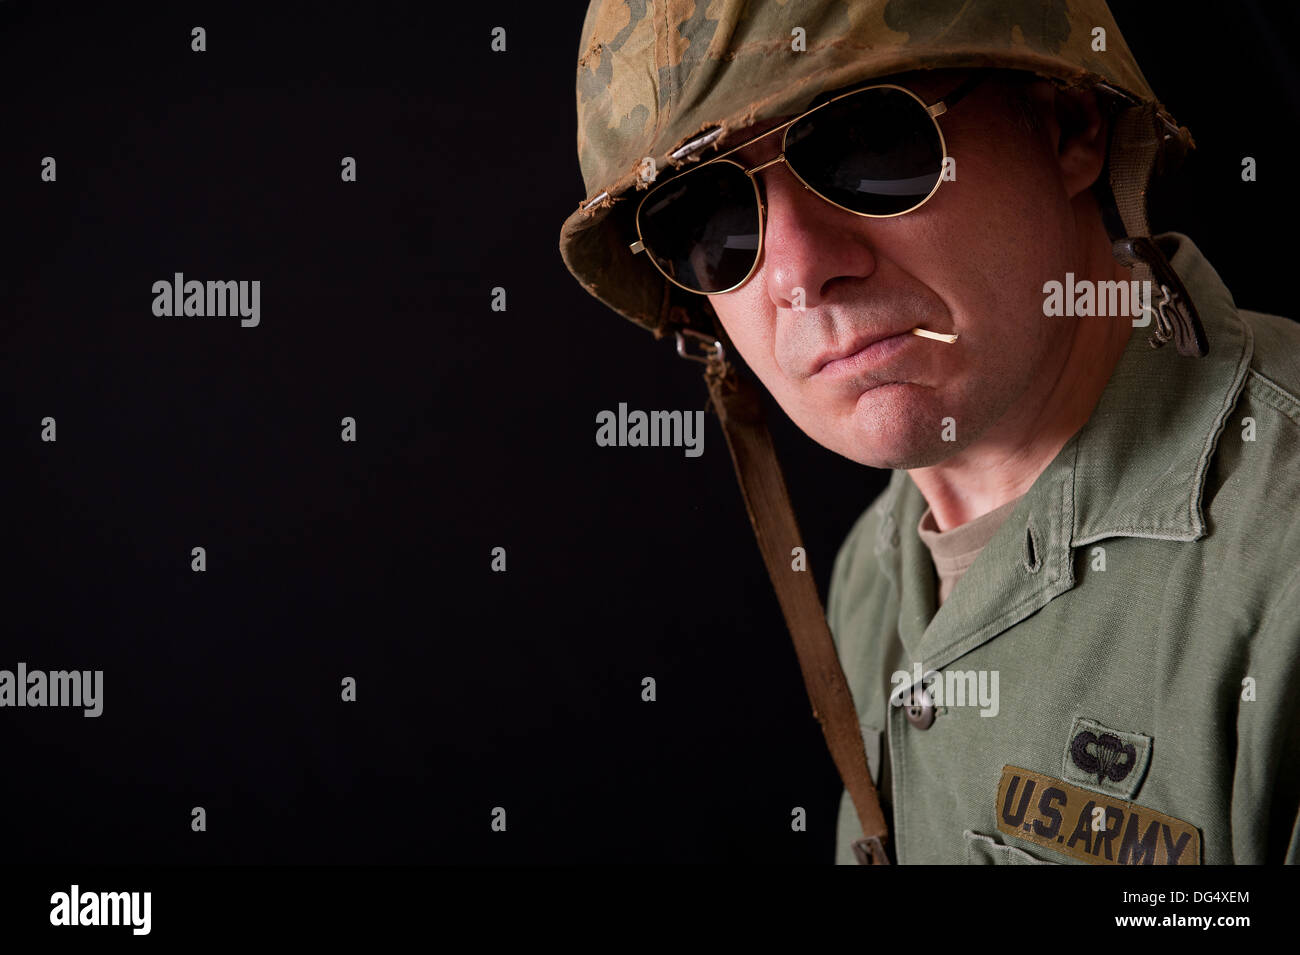 Portrait Of An American Soldier During The Vietnam War Period Wearing Dark Sunglasses And